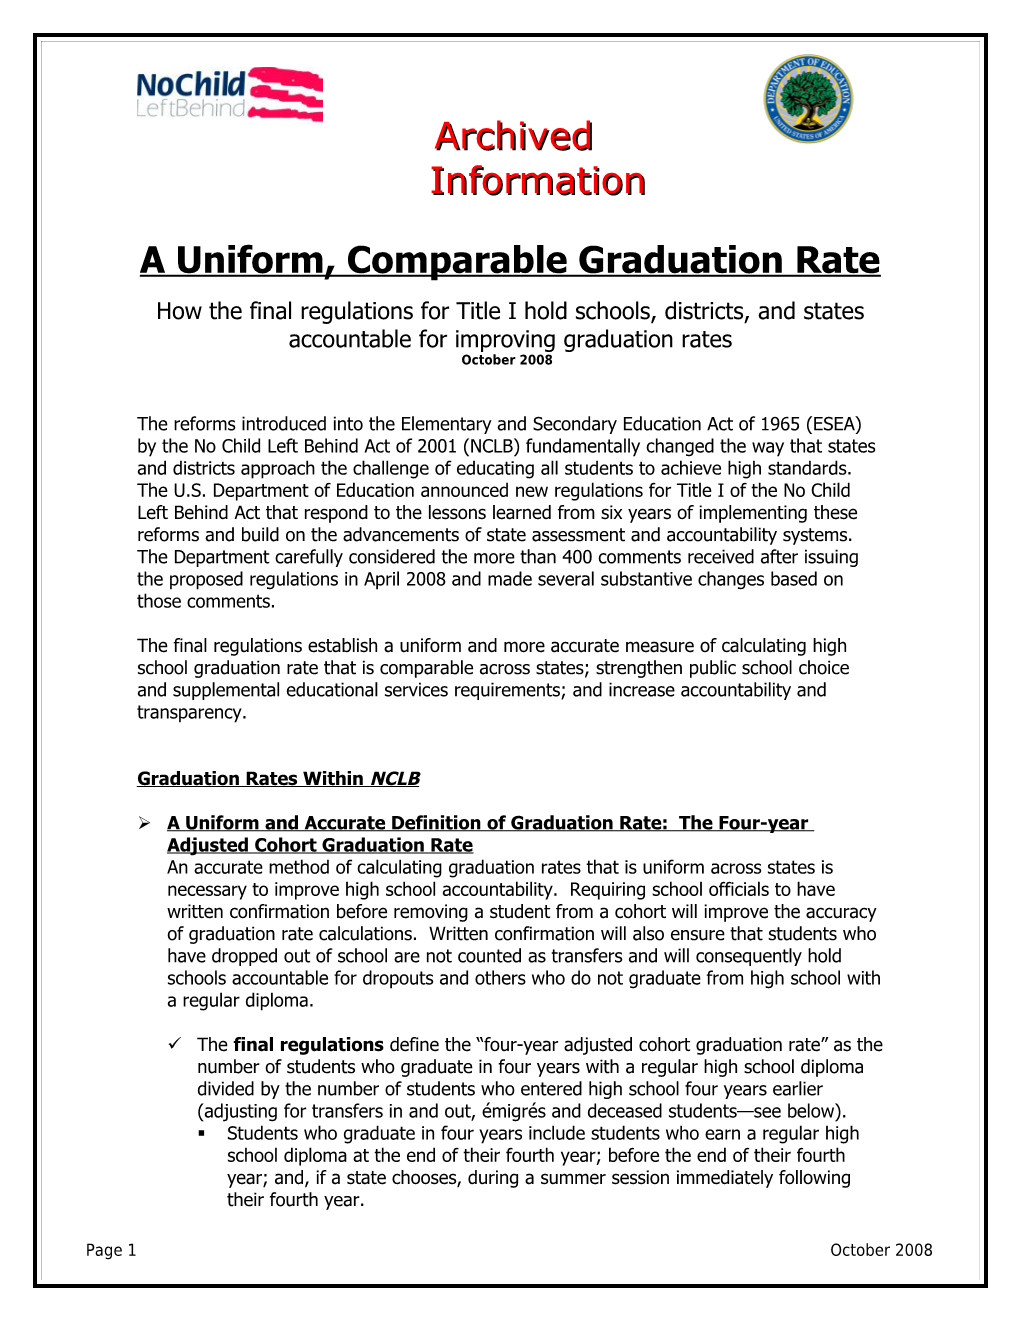 Archived: a Uniform, Comparable Graduation Rate October 2008 (Msword)